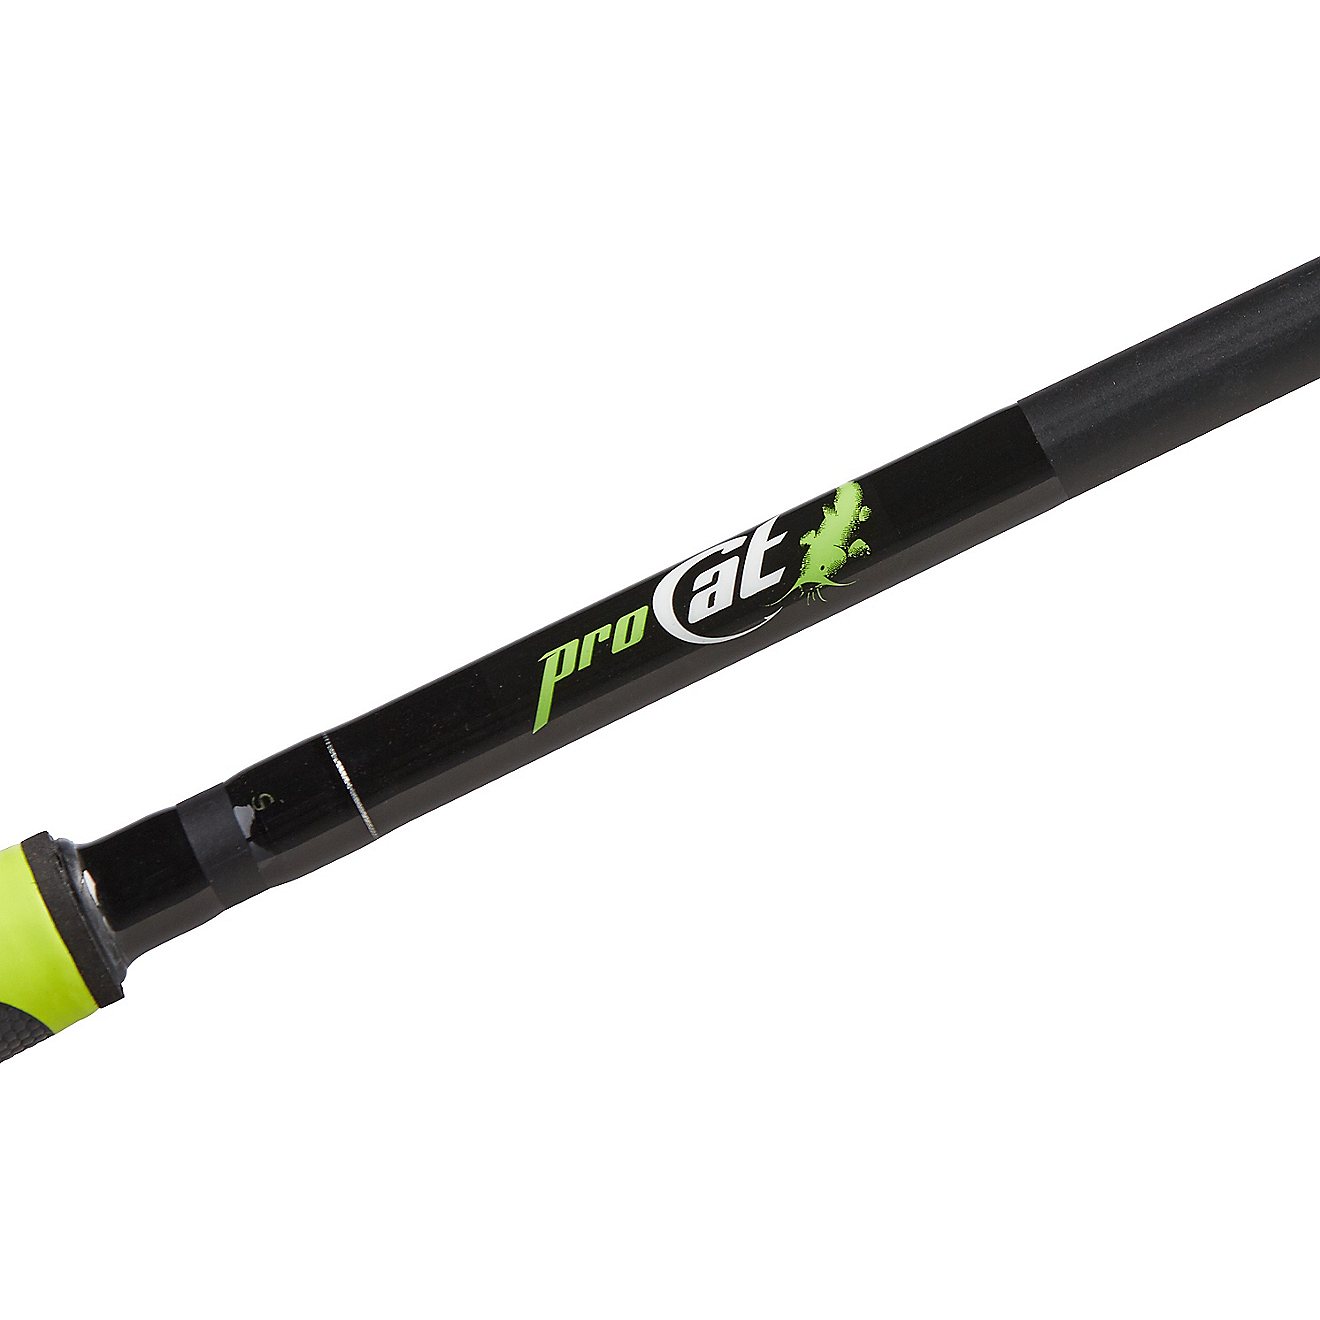 H2O XPRESS Pro Cat High Density Casting Rod                                                                                      - view number 2